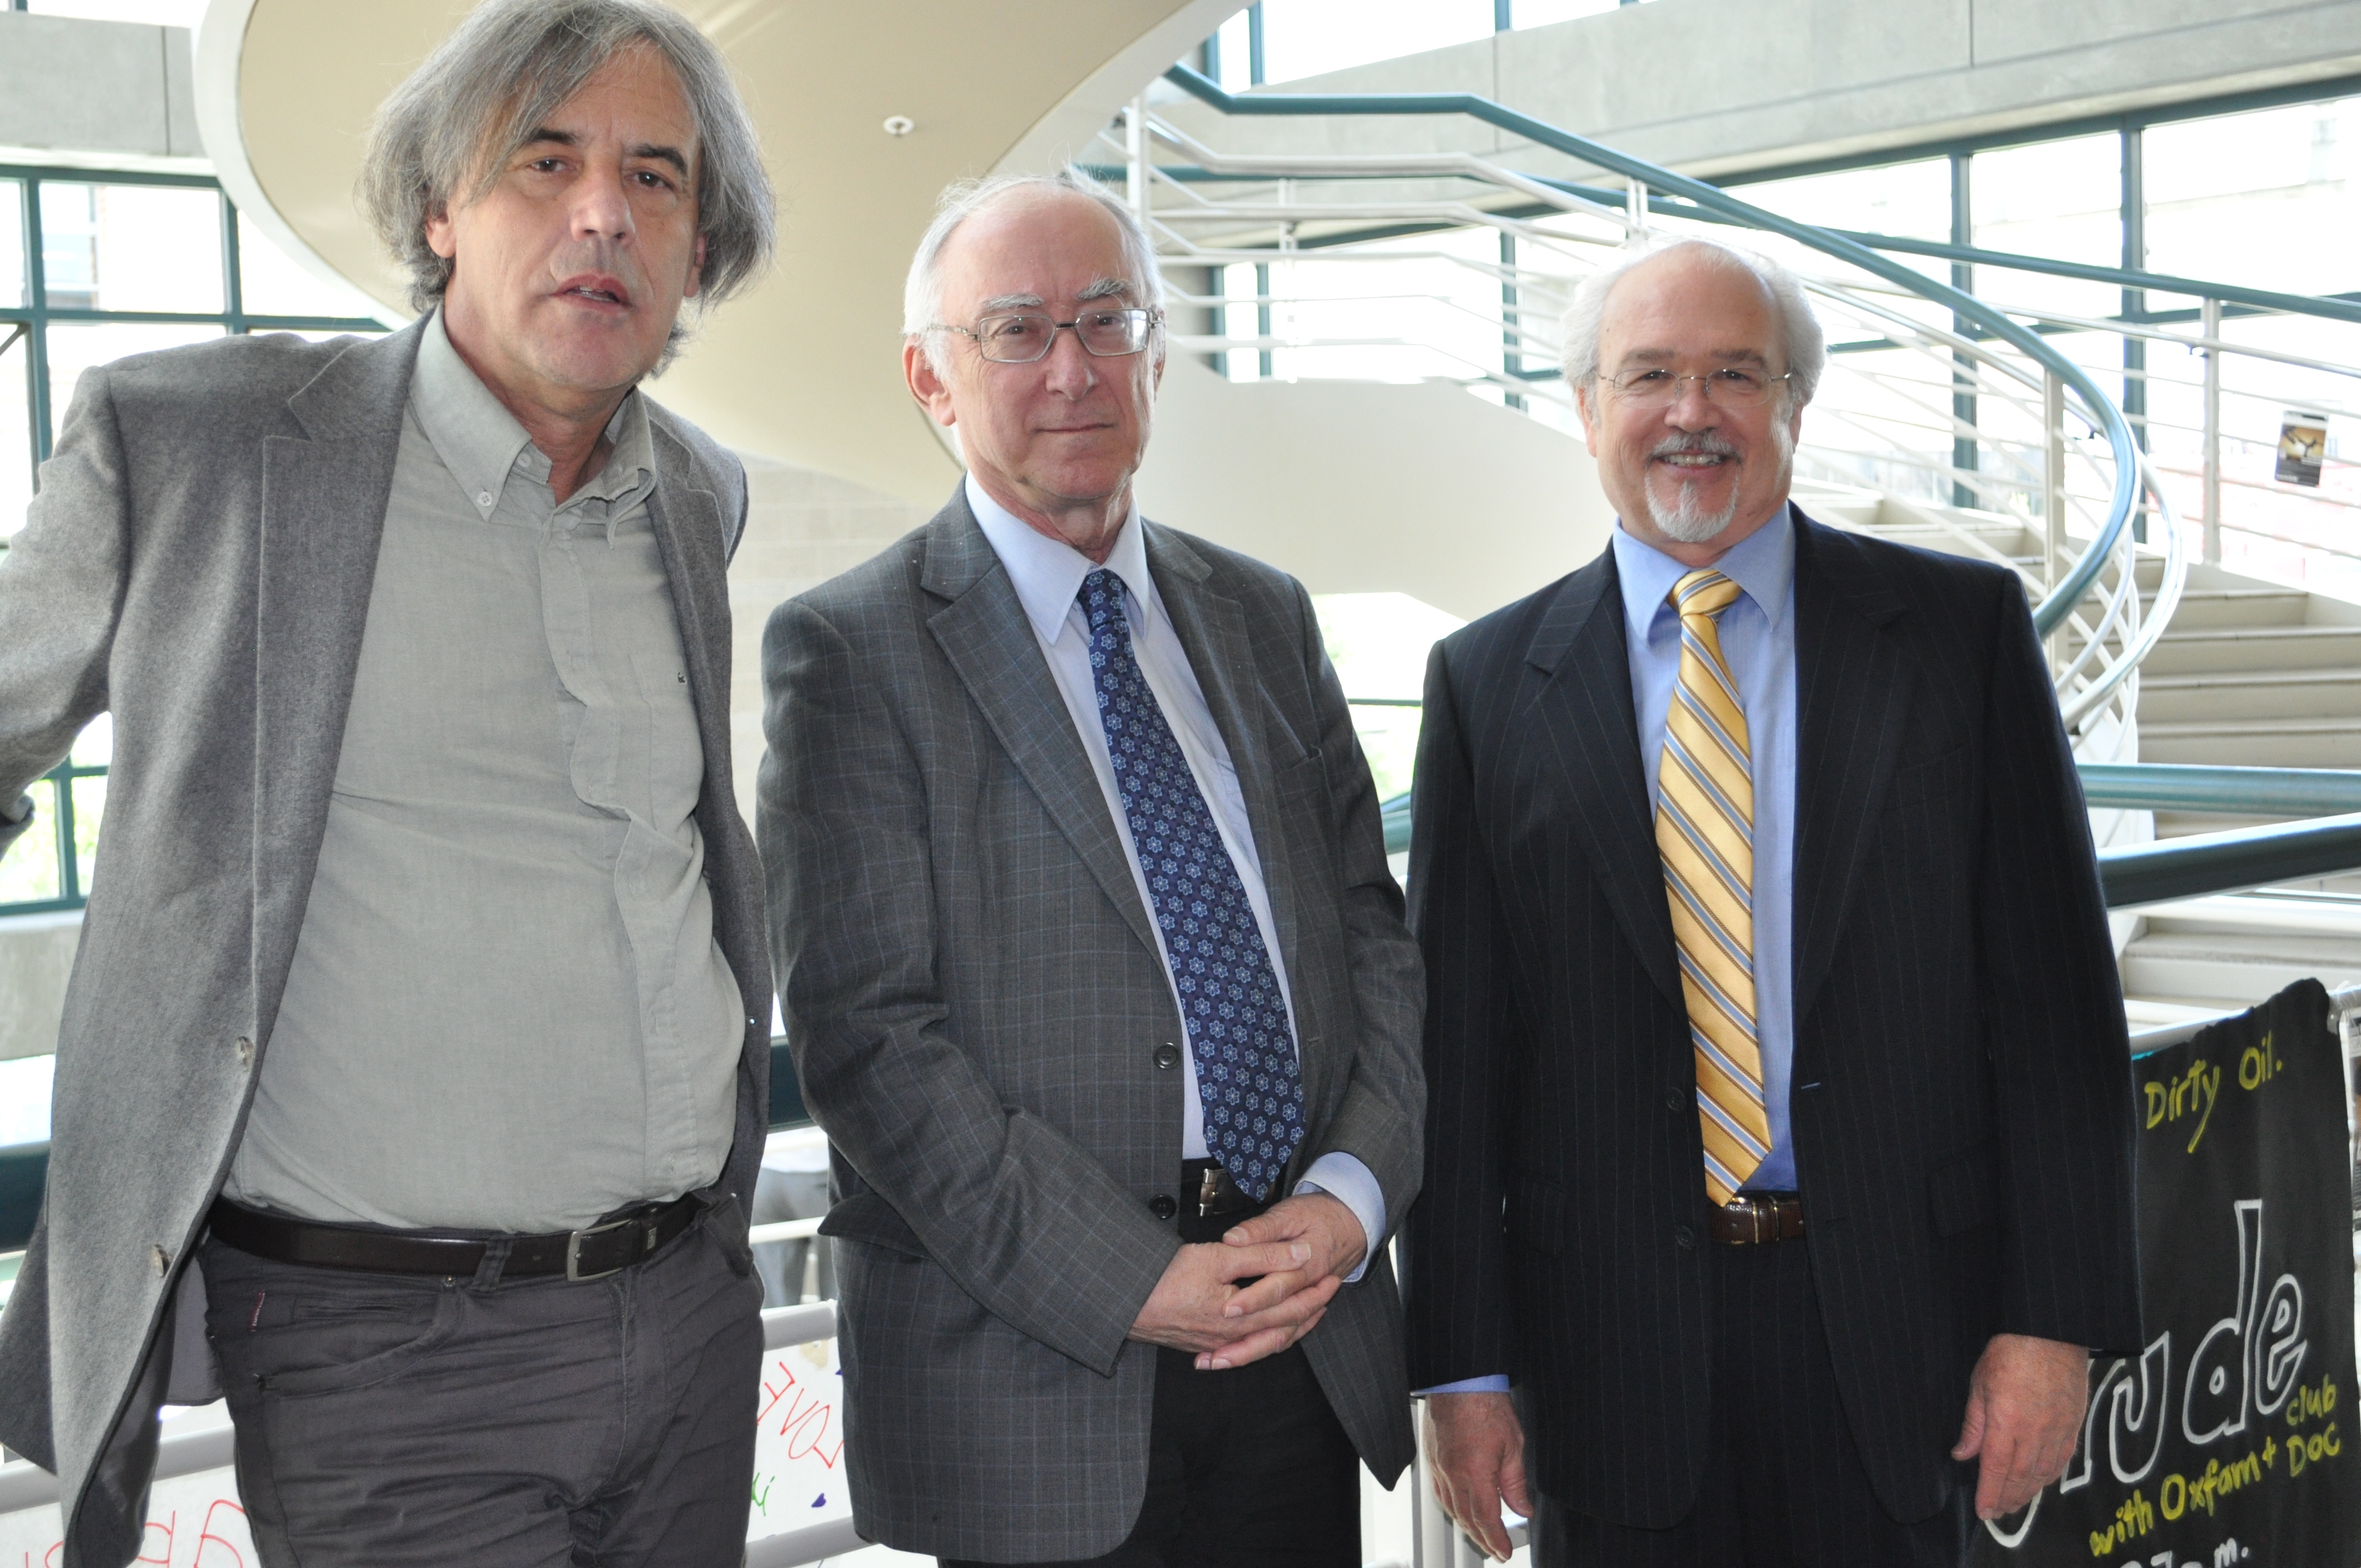 Chapman professors Patrick Quinn, left, and Joseph Runzo, right, are joined by Asa Kasher, Isreale Prize Laureate, at conference